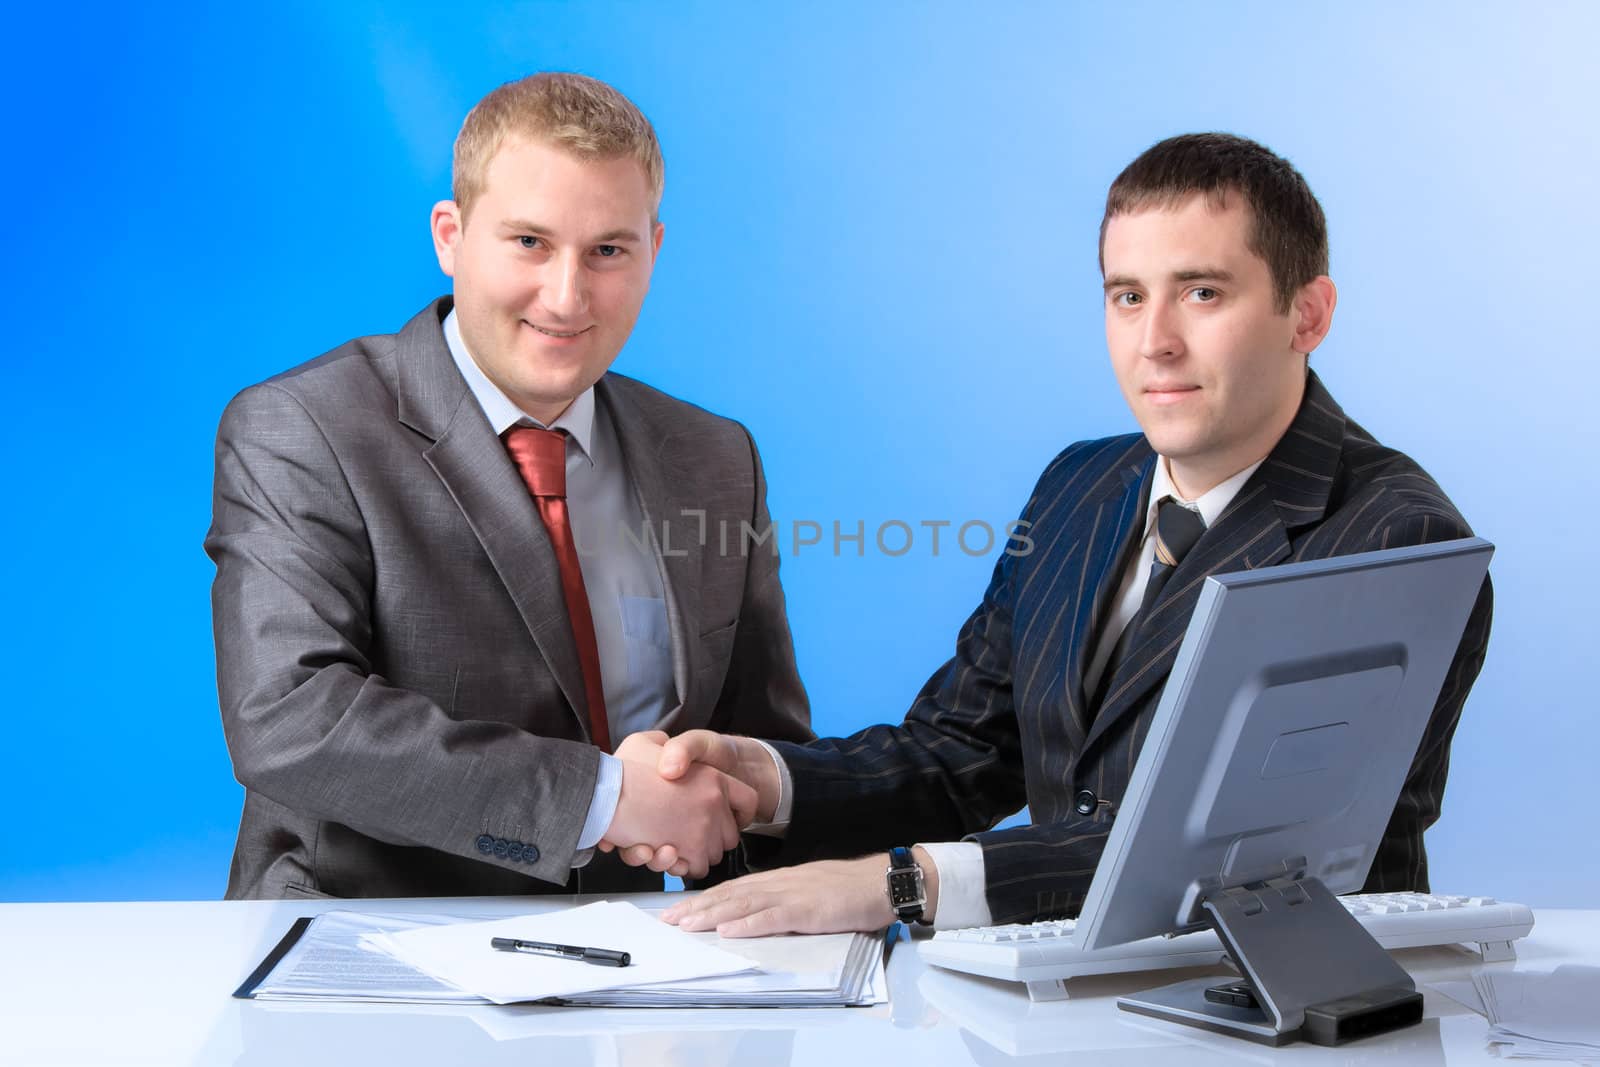 Two young handsome business men shake hands each other